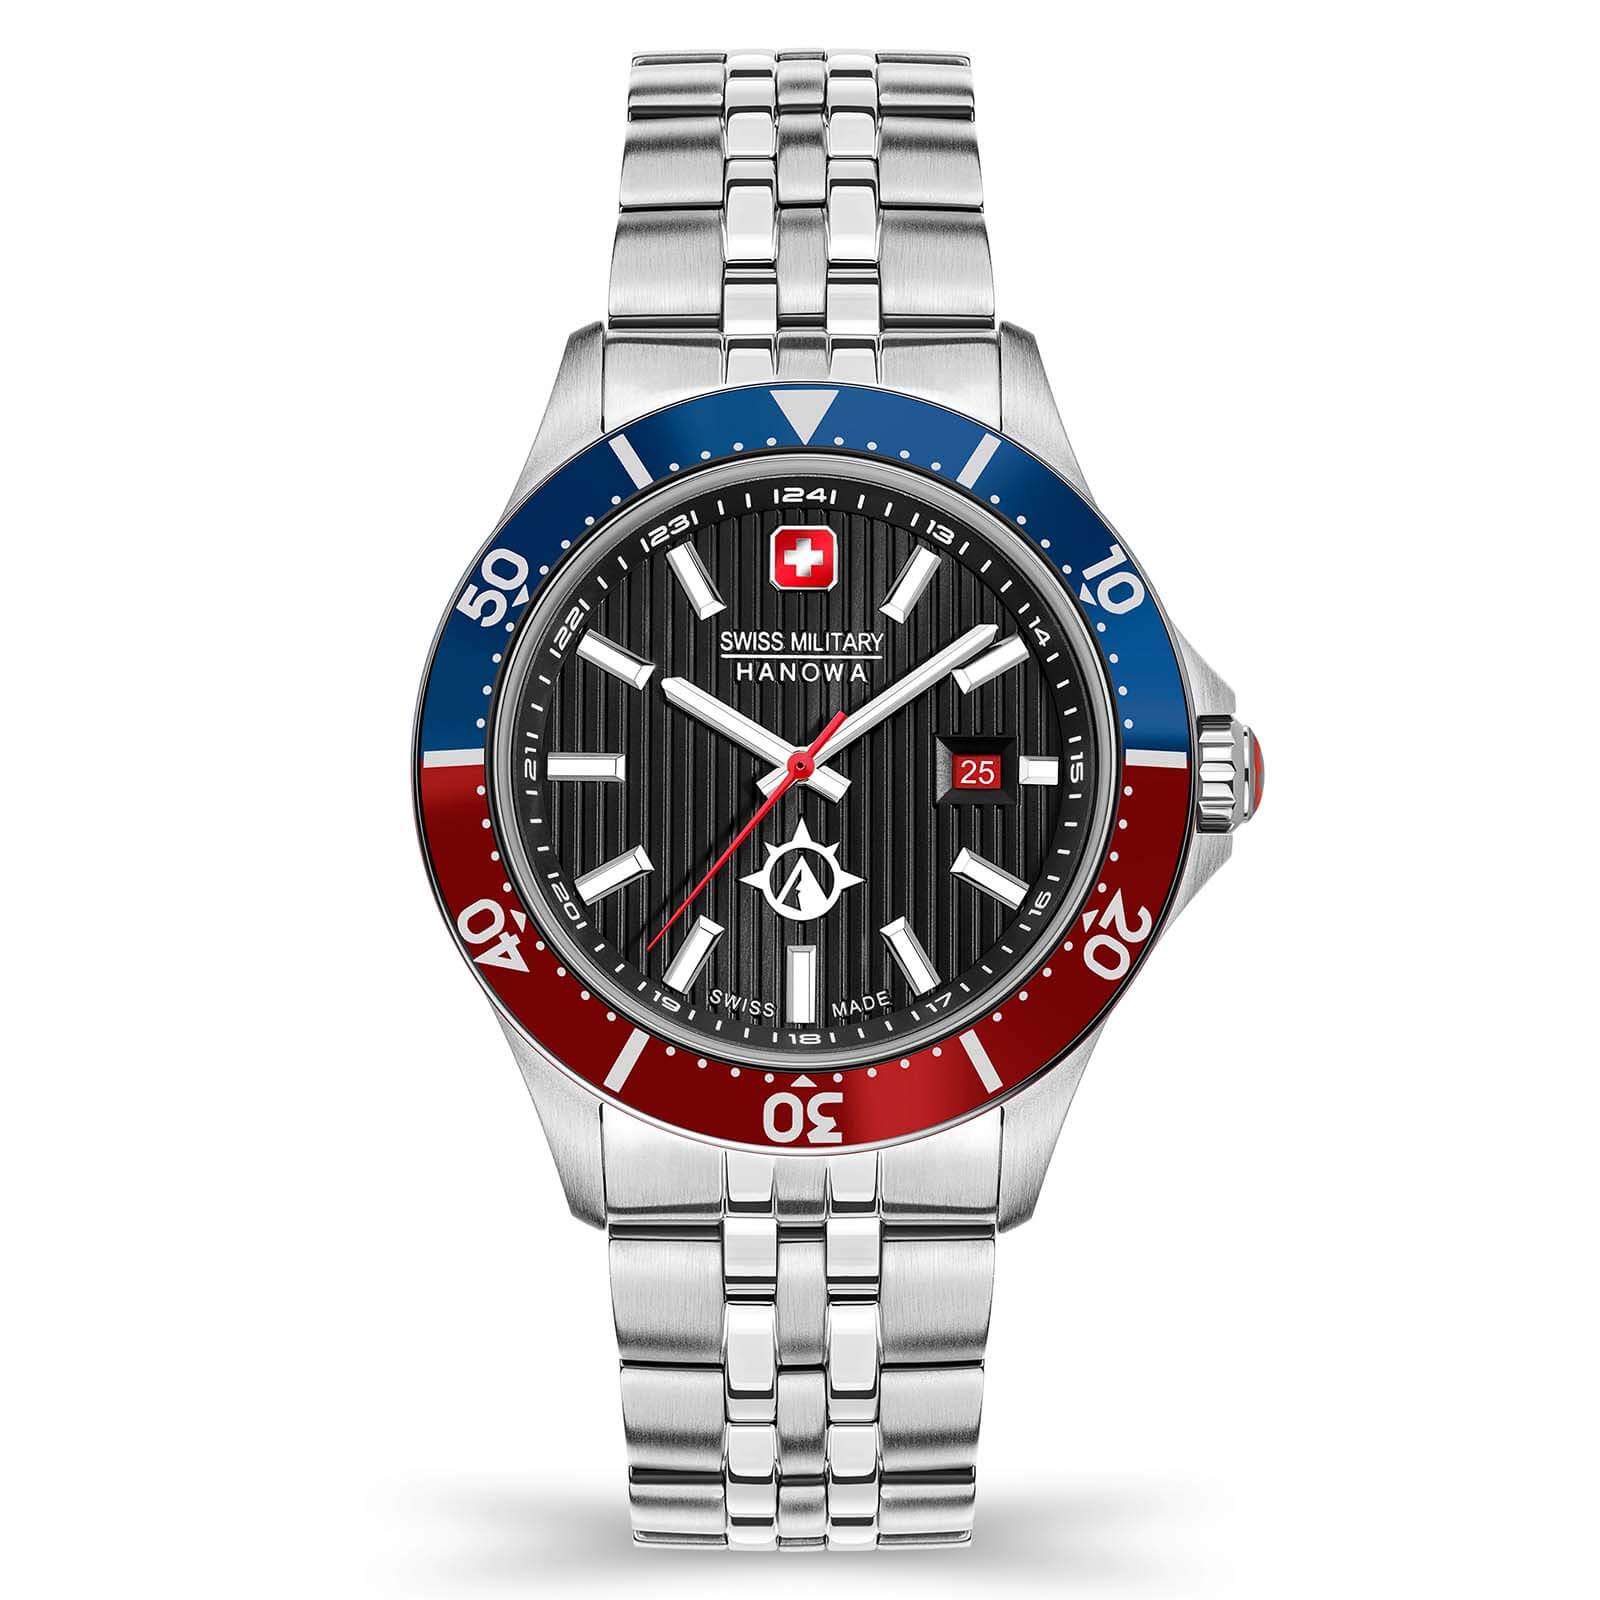 Military of Collections Switzerland Watches | Hanowa and Discover Online Prices – Watches Swiss